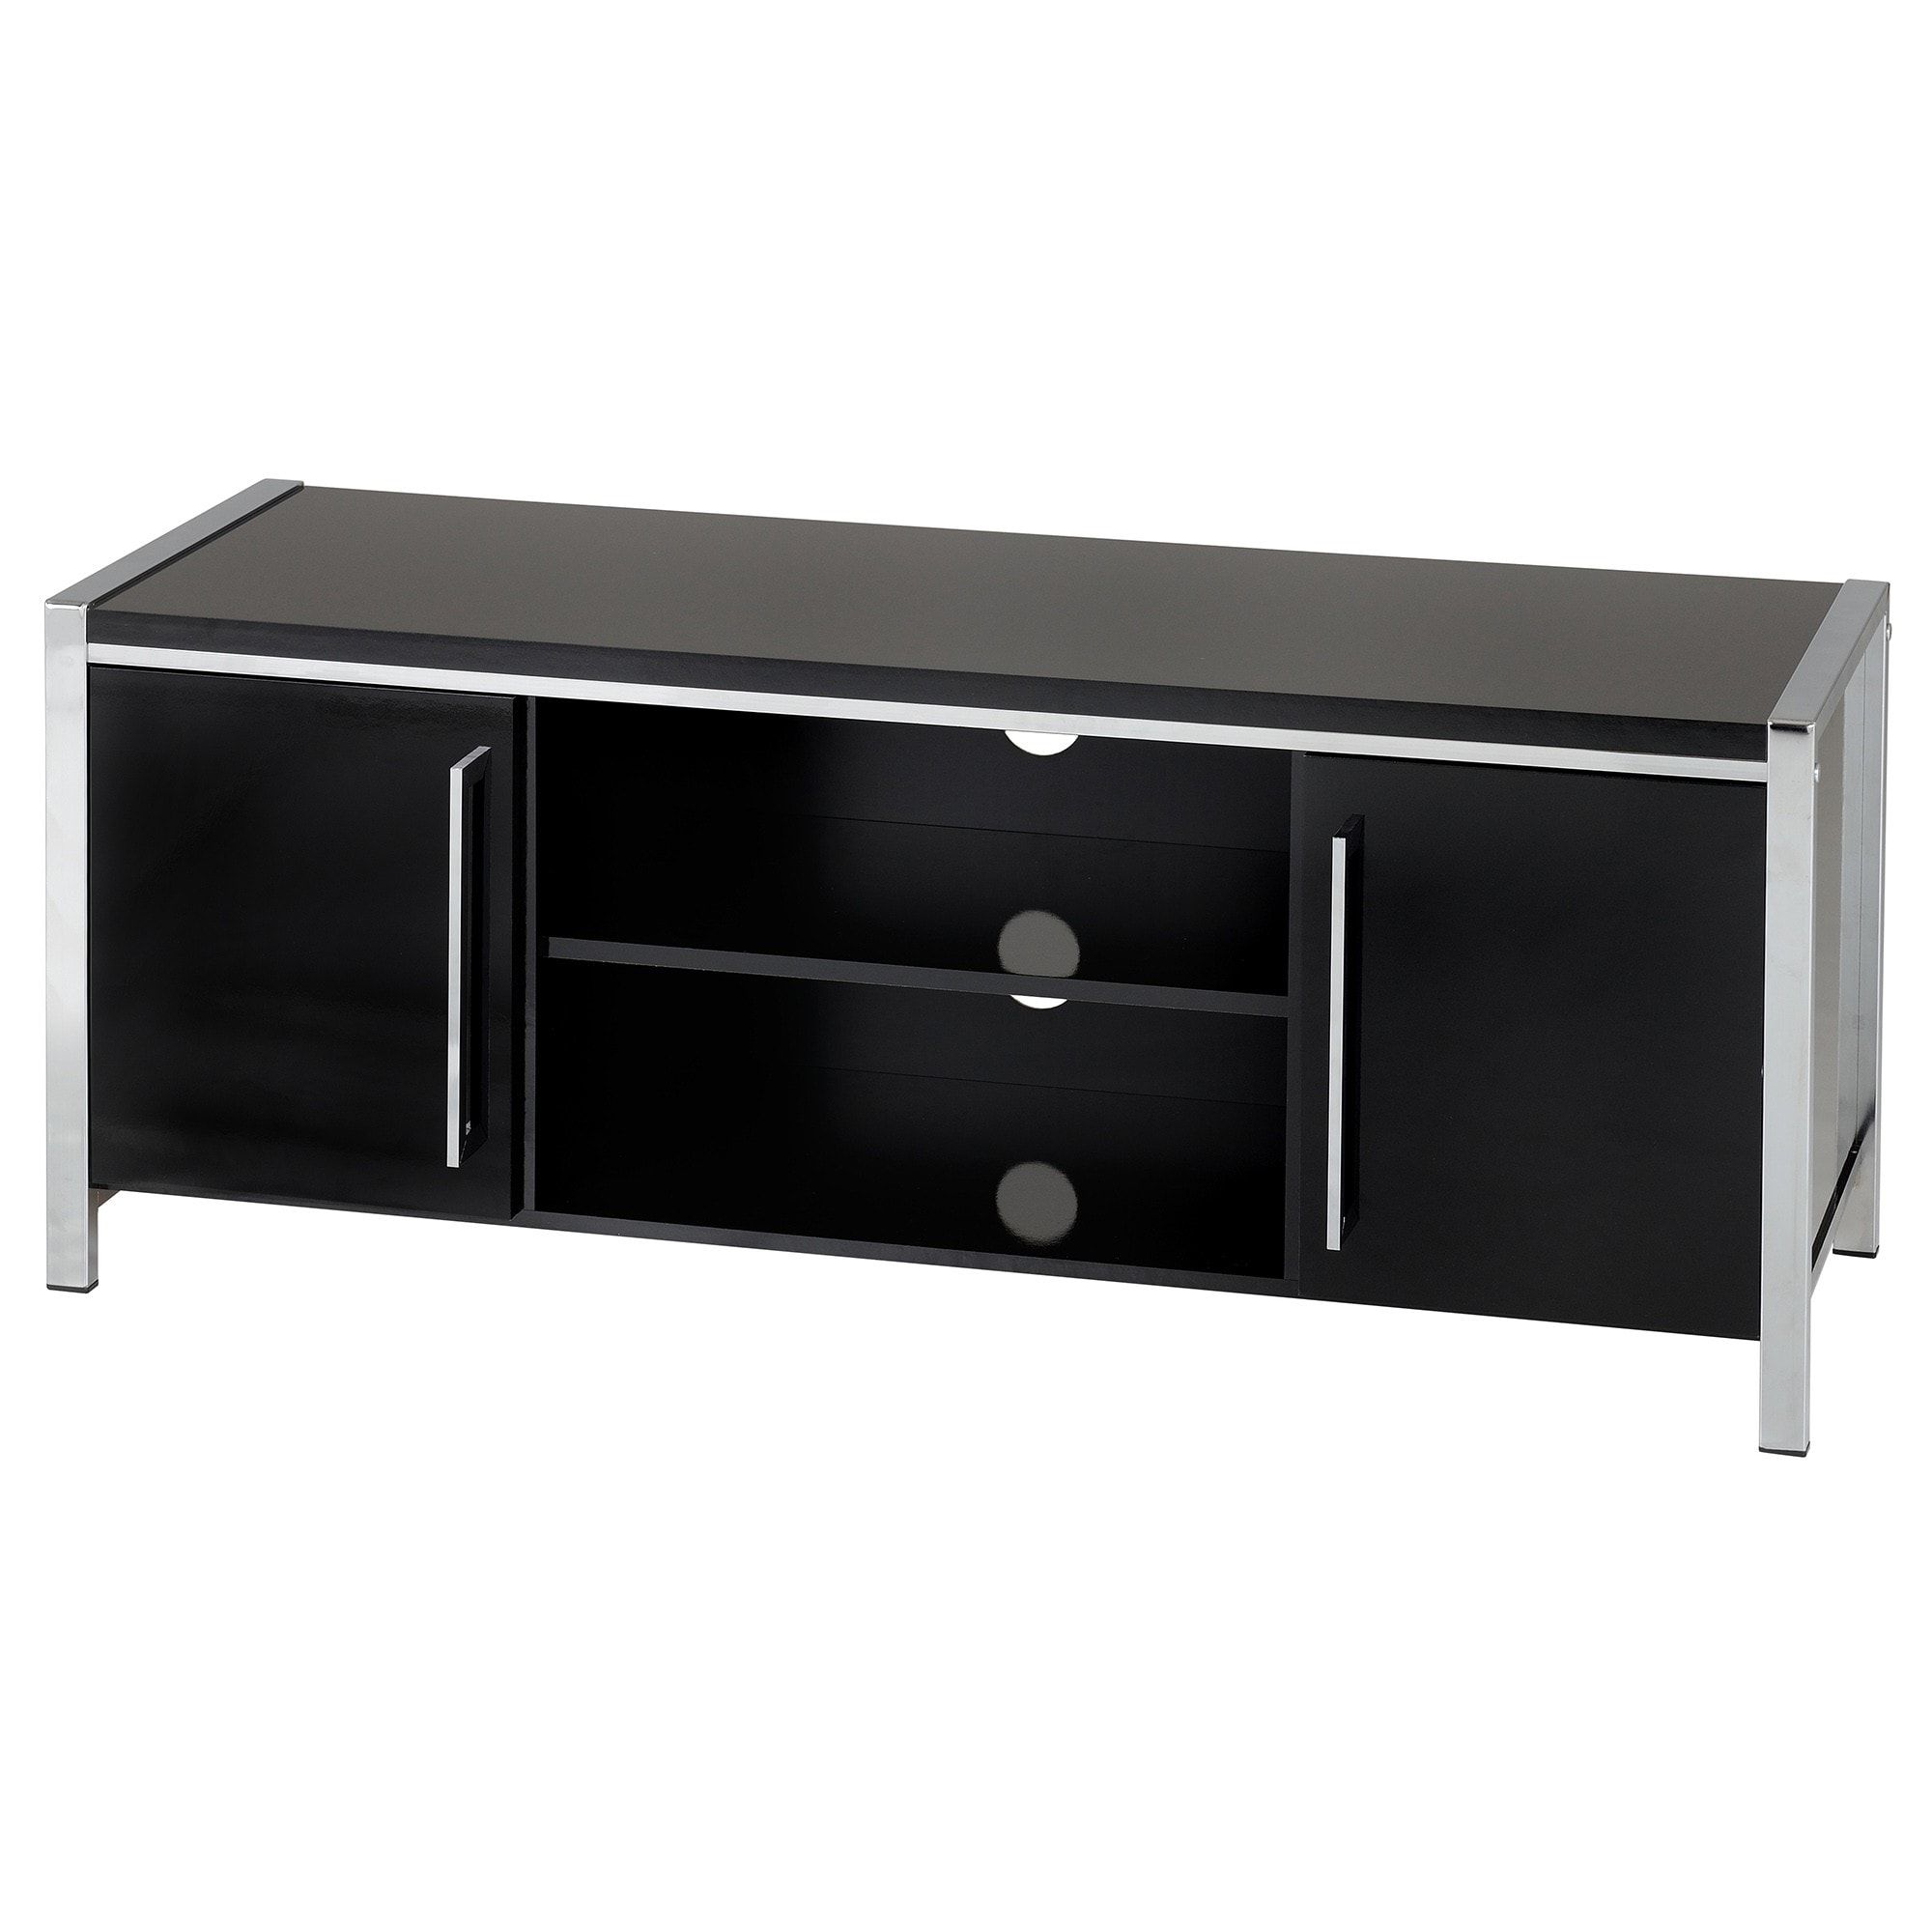 Charisma 2 Door Tv Unit | Modern Furniture | Tv Units With Regard To Charisma Tv Stands (View 4 of 20)